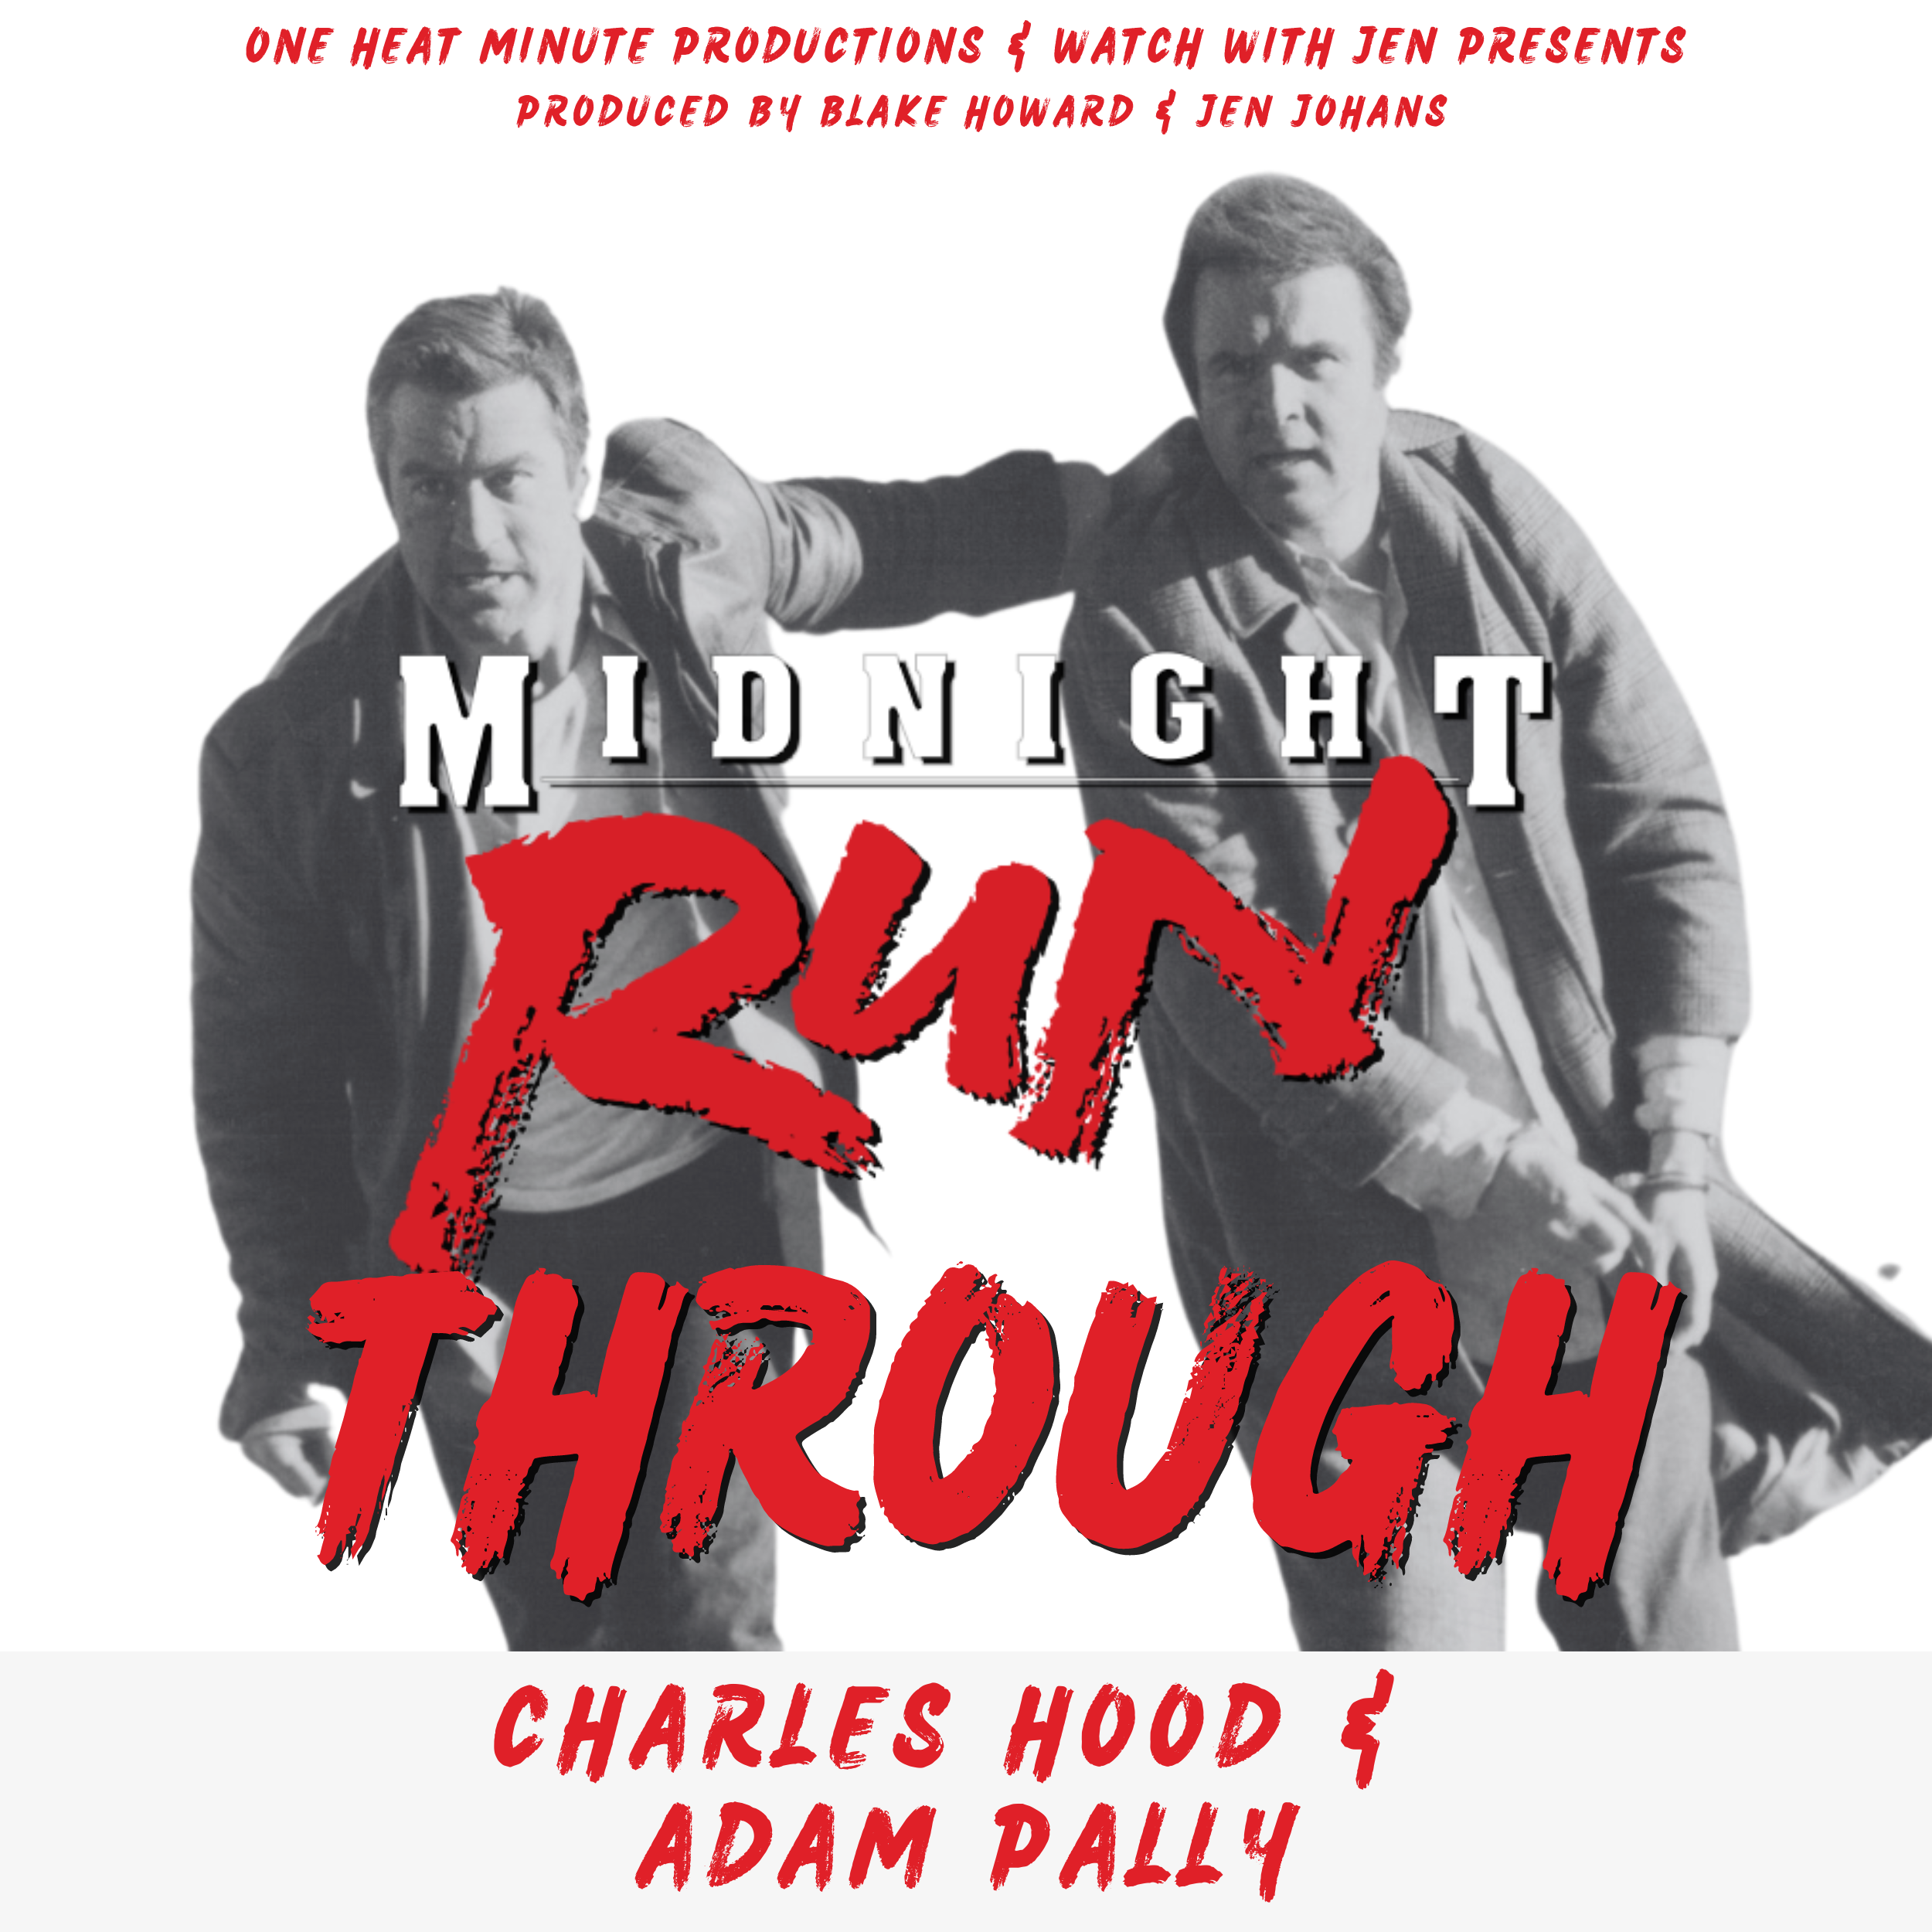 MIDNIGHT RUN-THROUGH - Episode 10 - Charles Hood & Adam Pally (From One Heat Minute Productions & Watch With Jen)